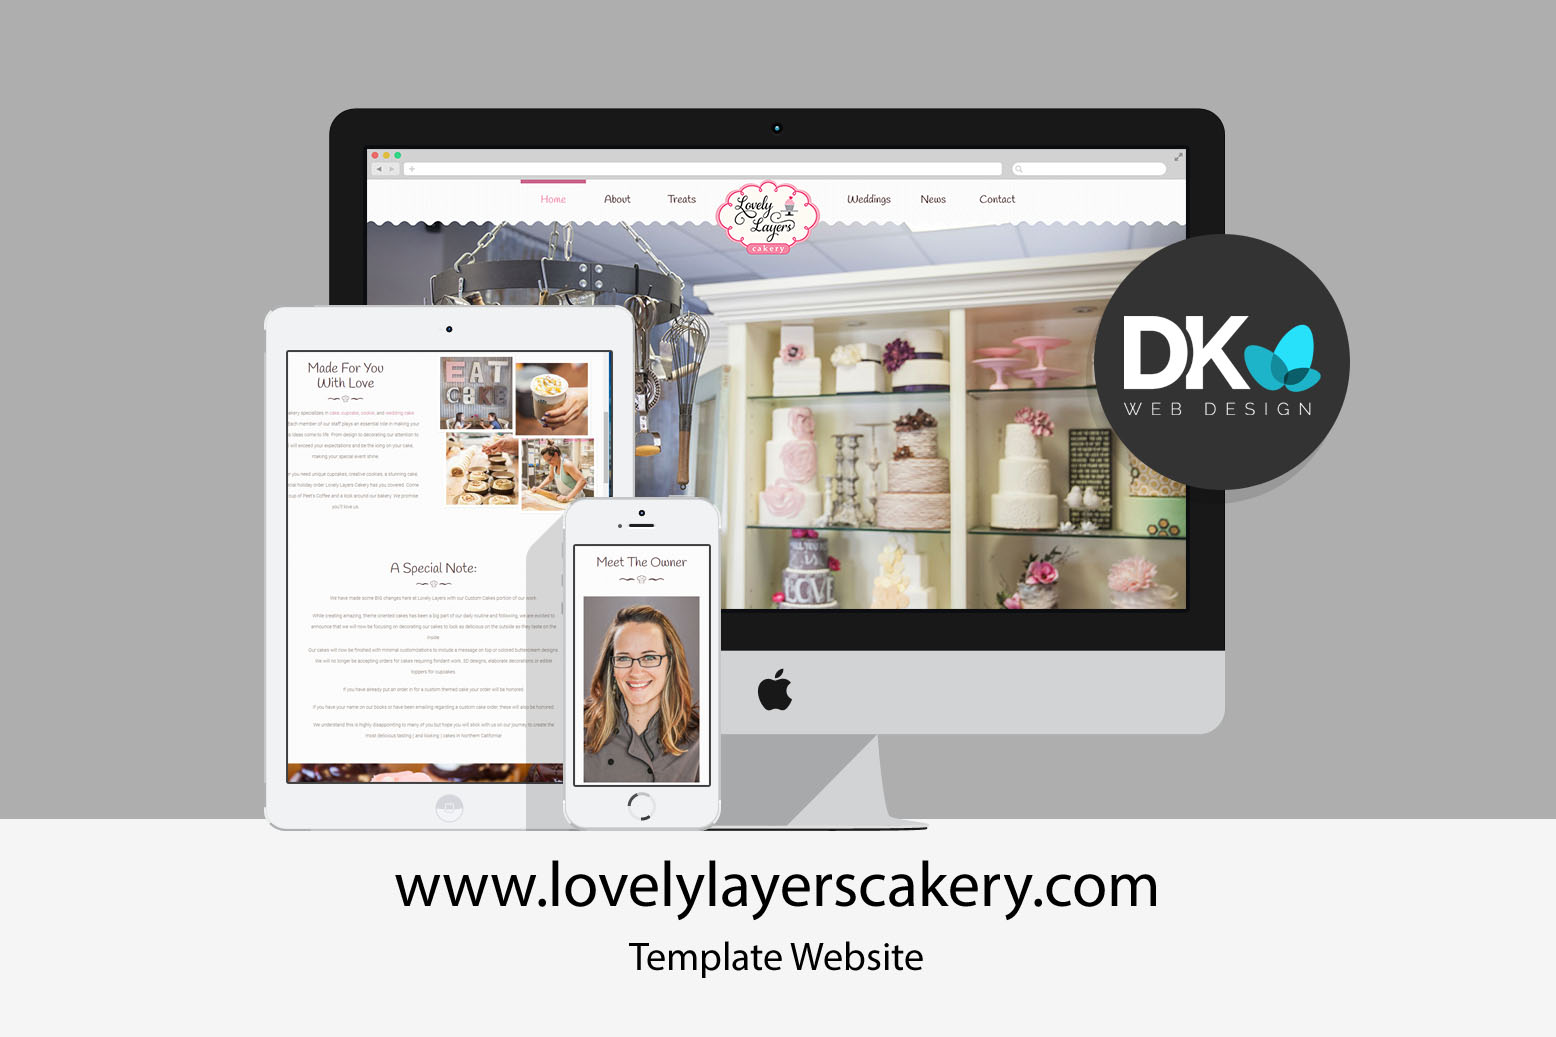 Showcase image for Lovely Layers Cakery website